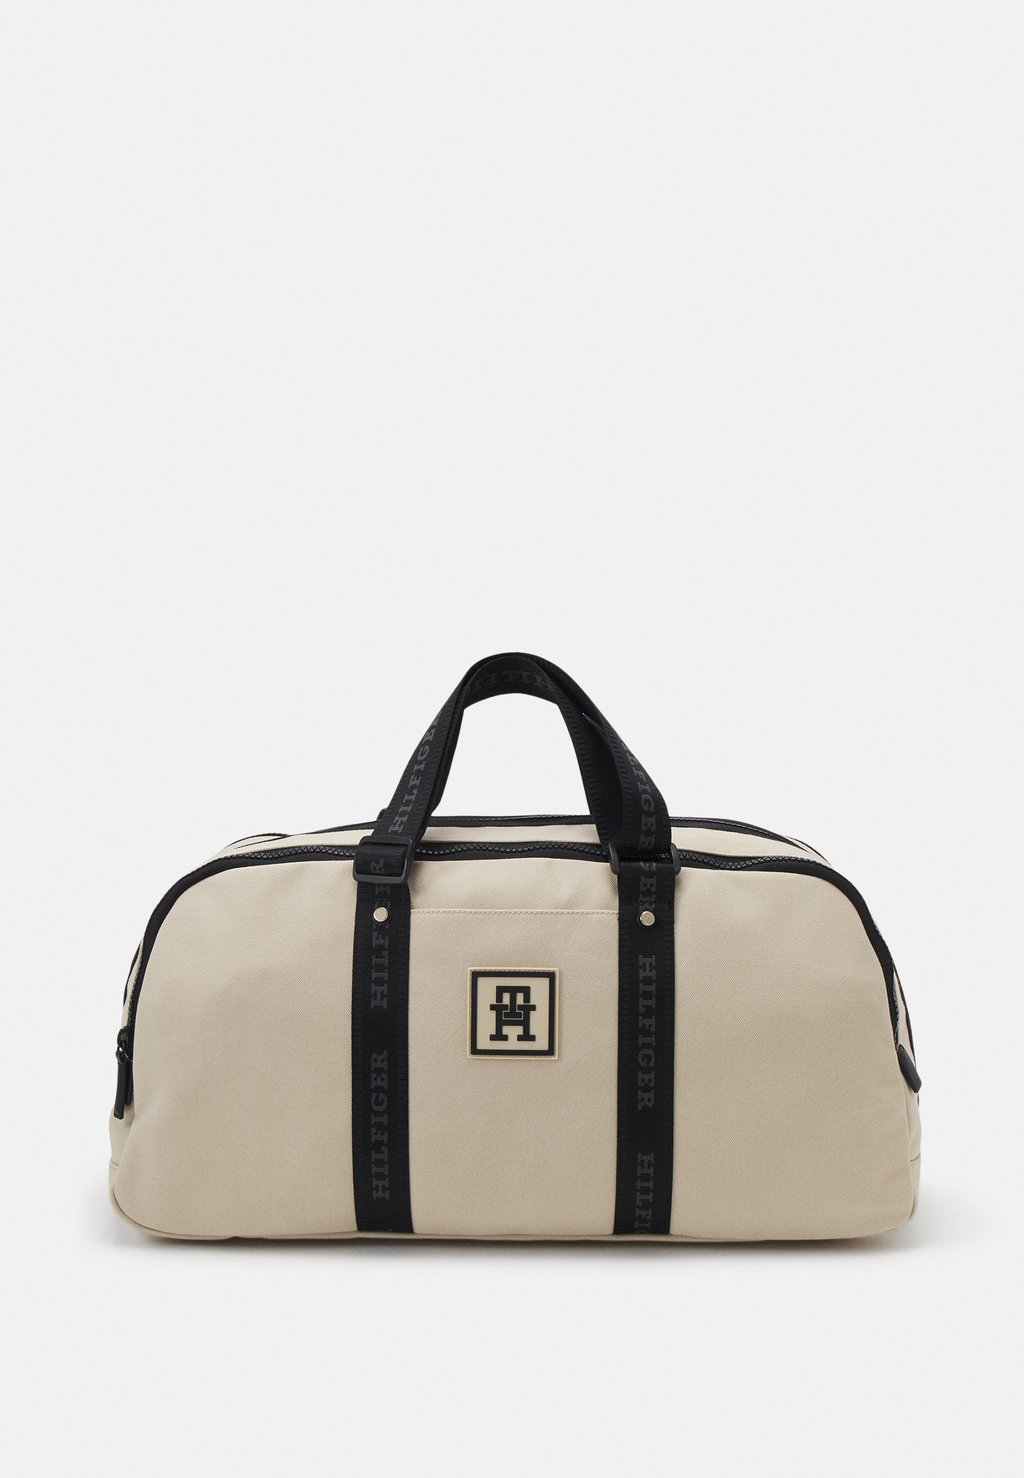 Сумка Weekender SPORT LUXE DUFFLE Tommy Hilfiger, цвет white clay